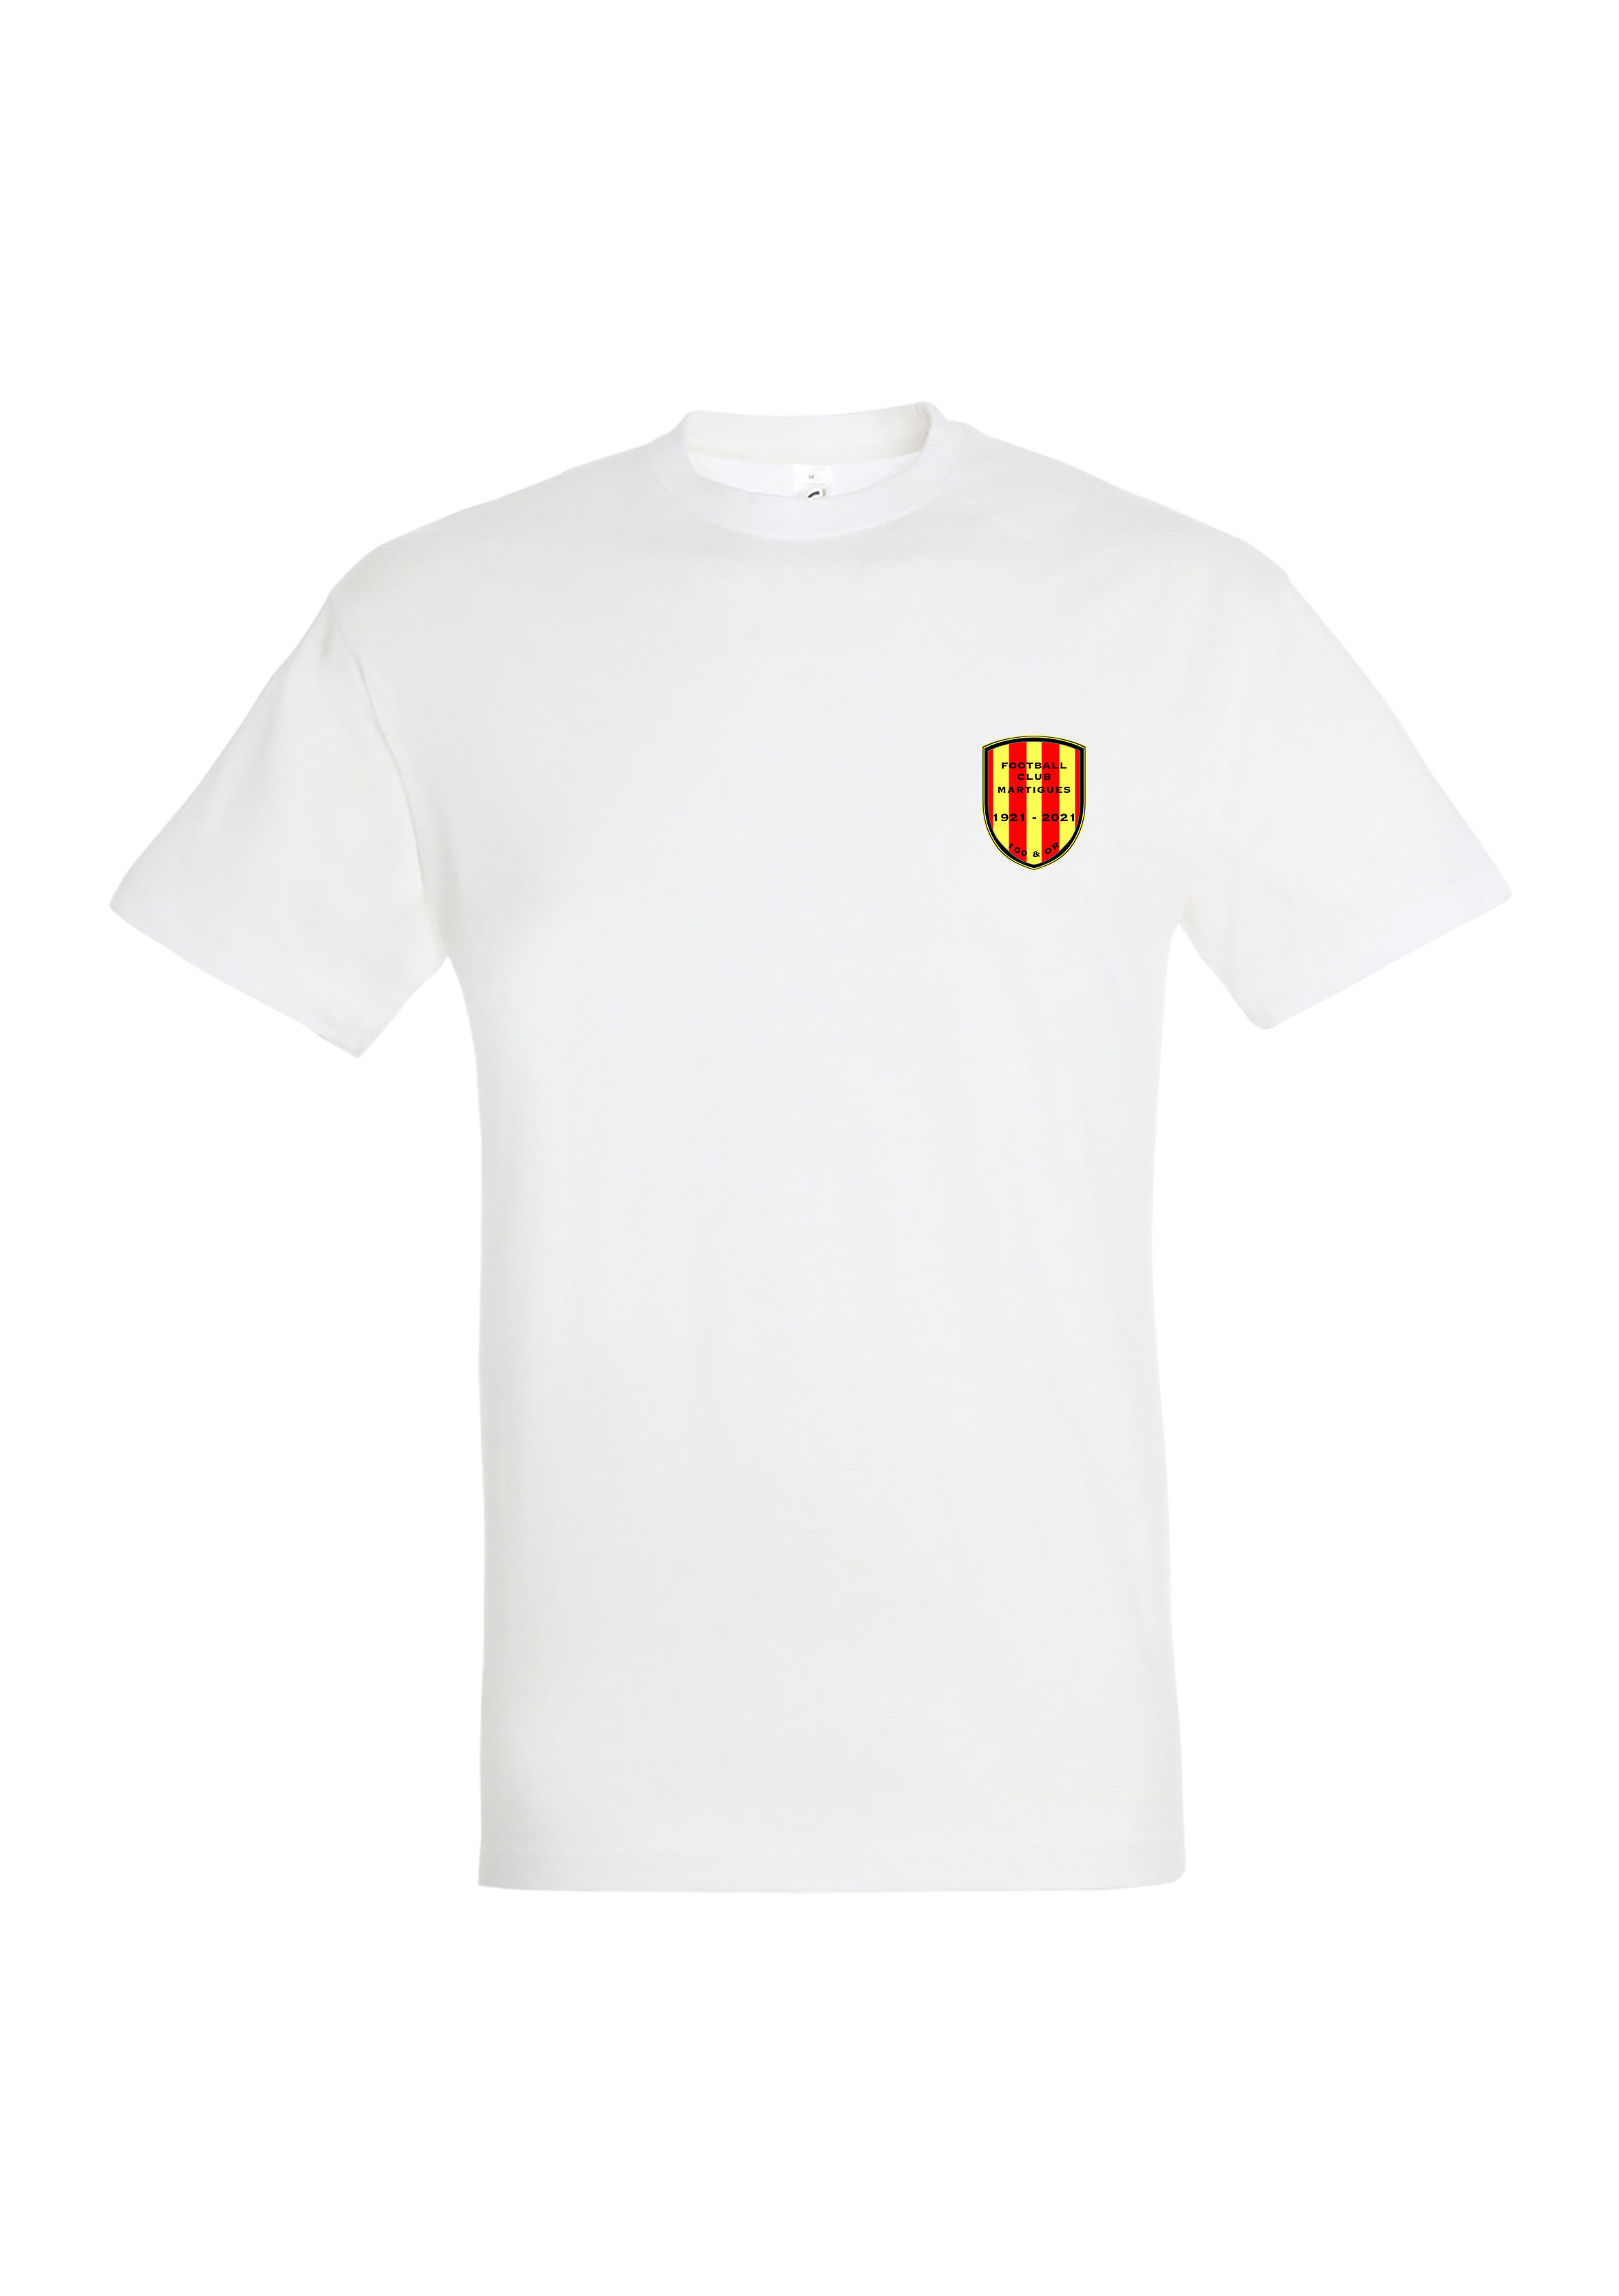 T-shirt Adulte Blanc "100 et Or" - n11380102A